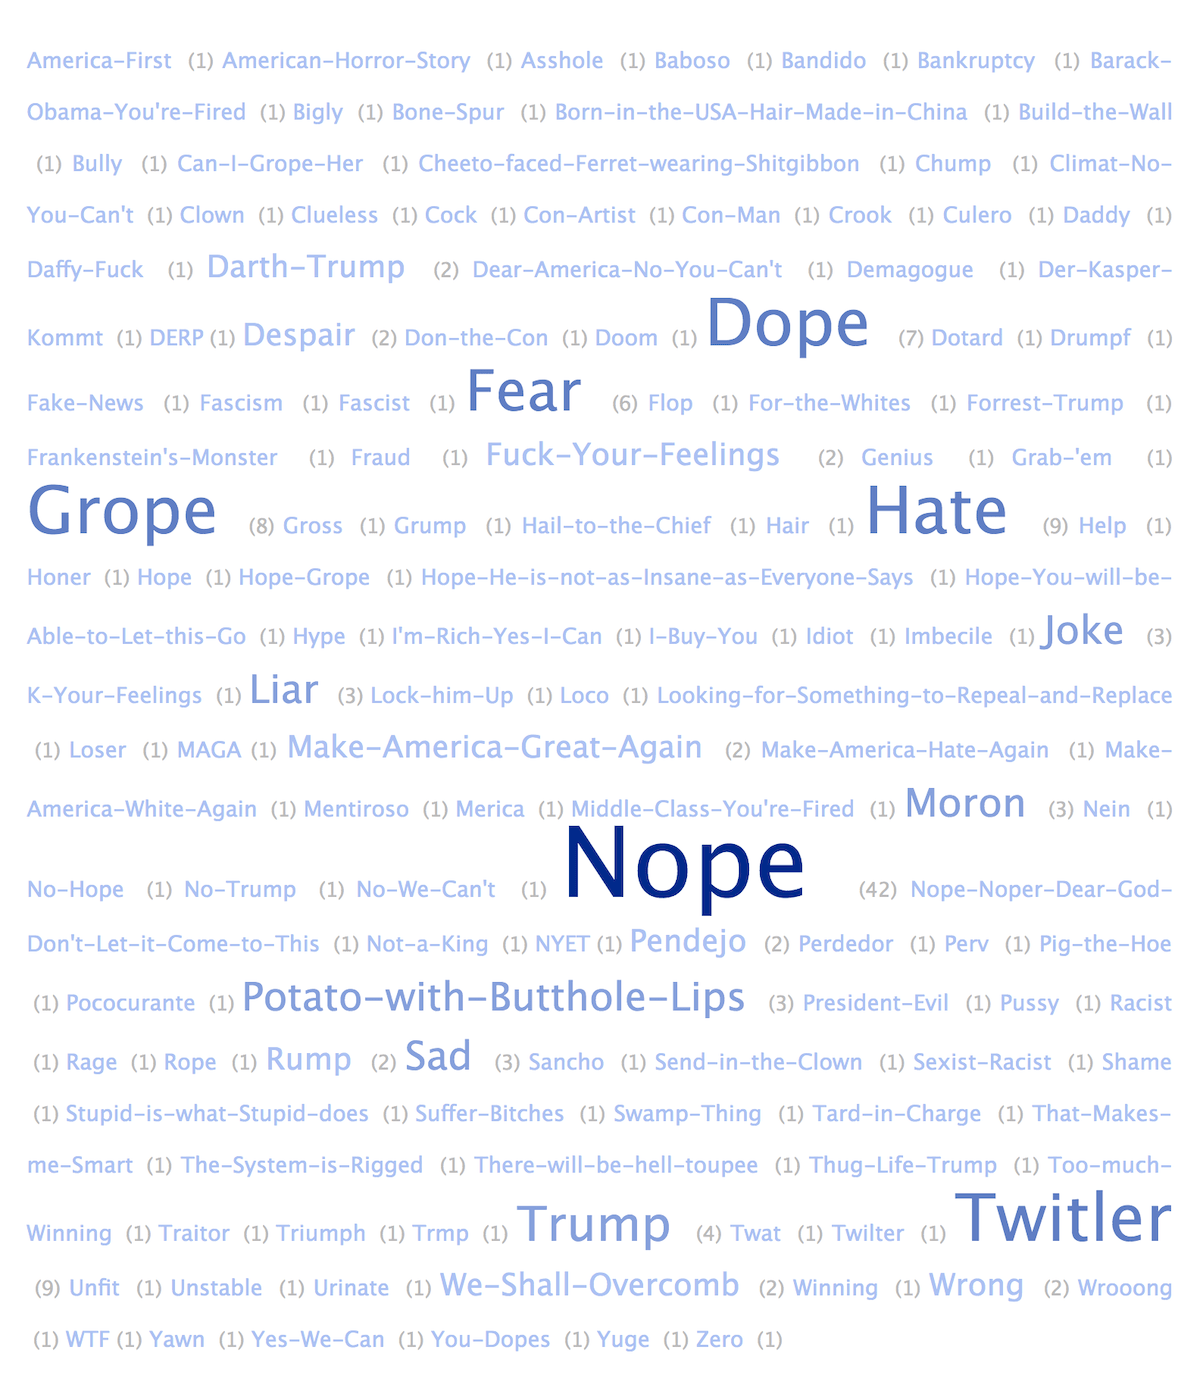 Word Cloud depicting Captions of Trumpicons from our Data Set. In this word cloud, a intensity of the blue hue and size of font communicate the frequency of
          captions. Darker blue in larger font represents more frequency. Additionally, this word cloud provides quantitative data, identifying the specific times a caption shows up in our data set.